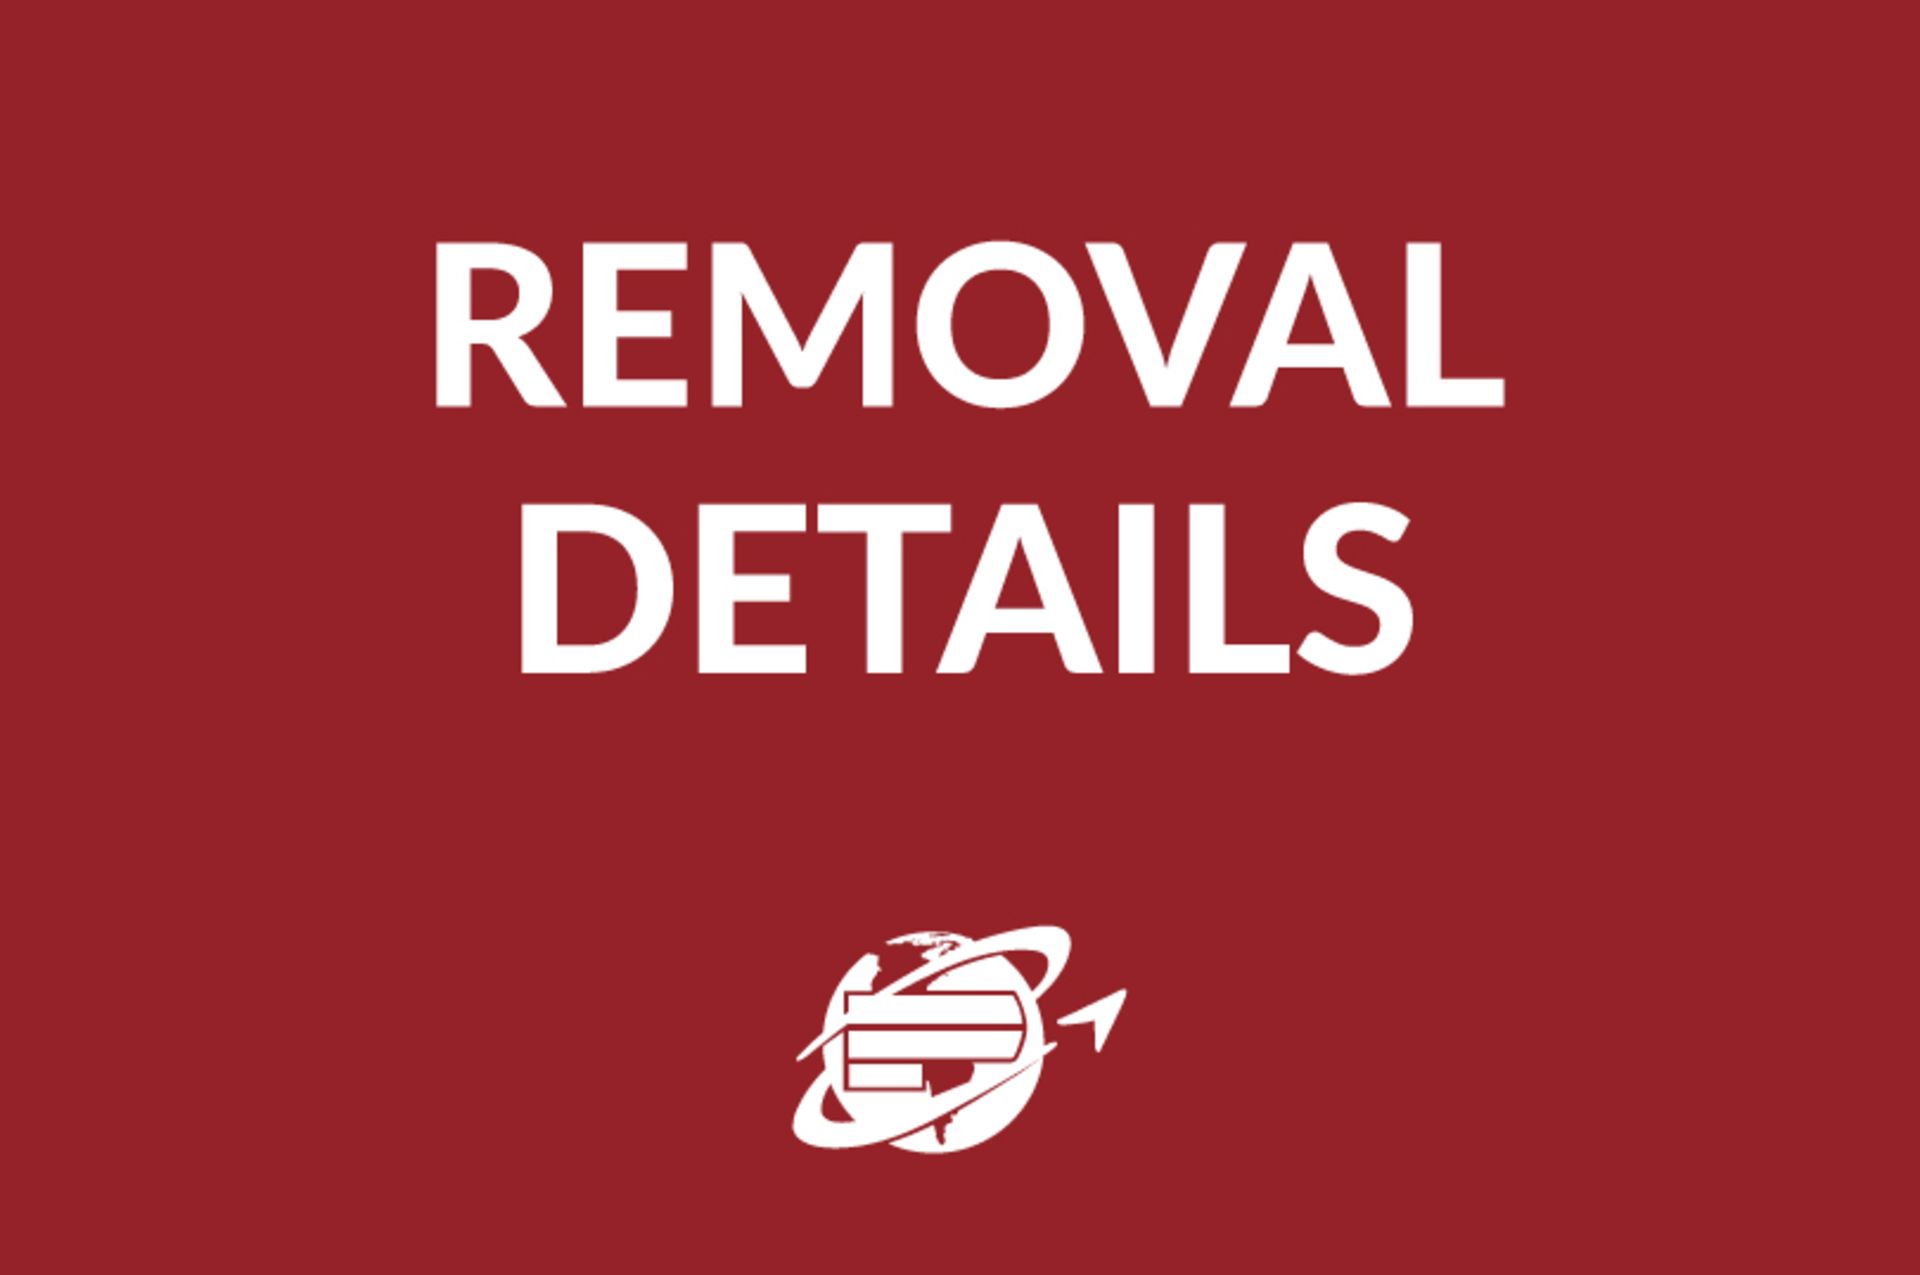 All items must be removed no later than Friday, May 24. All removal is strictly on an appointment on